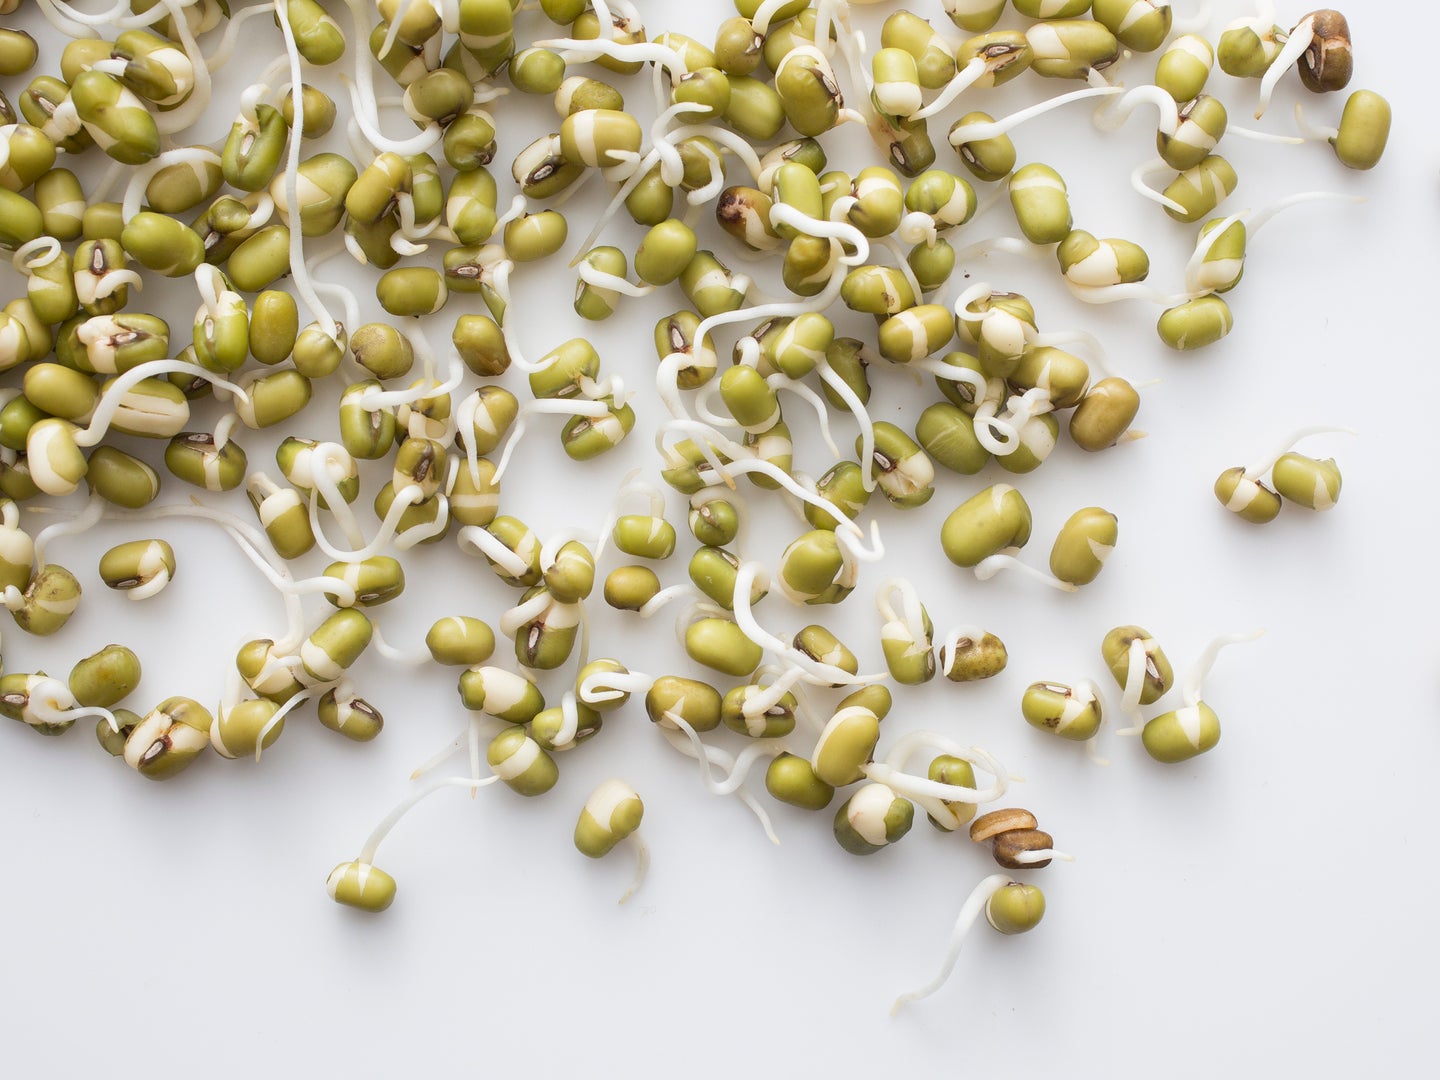 Sprouted Mung Beans